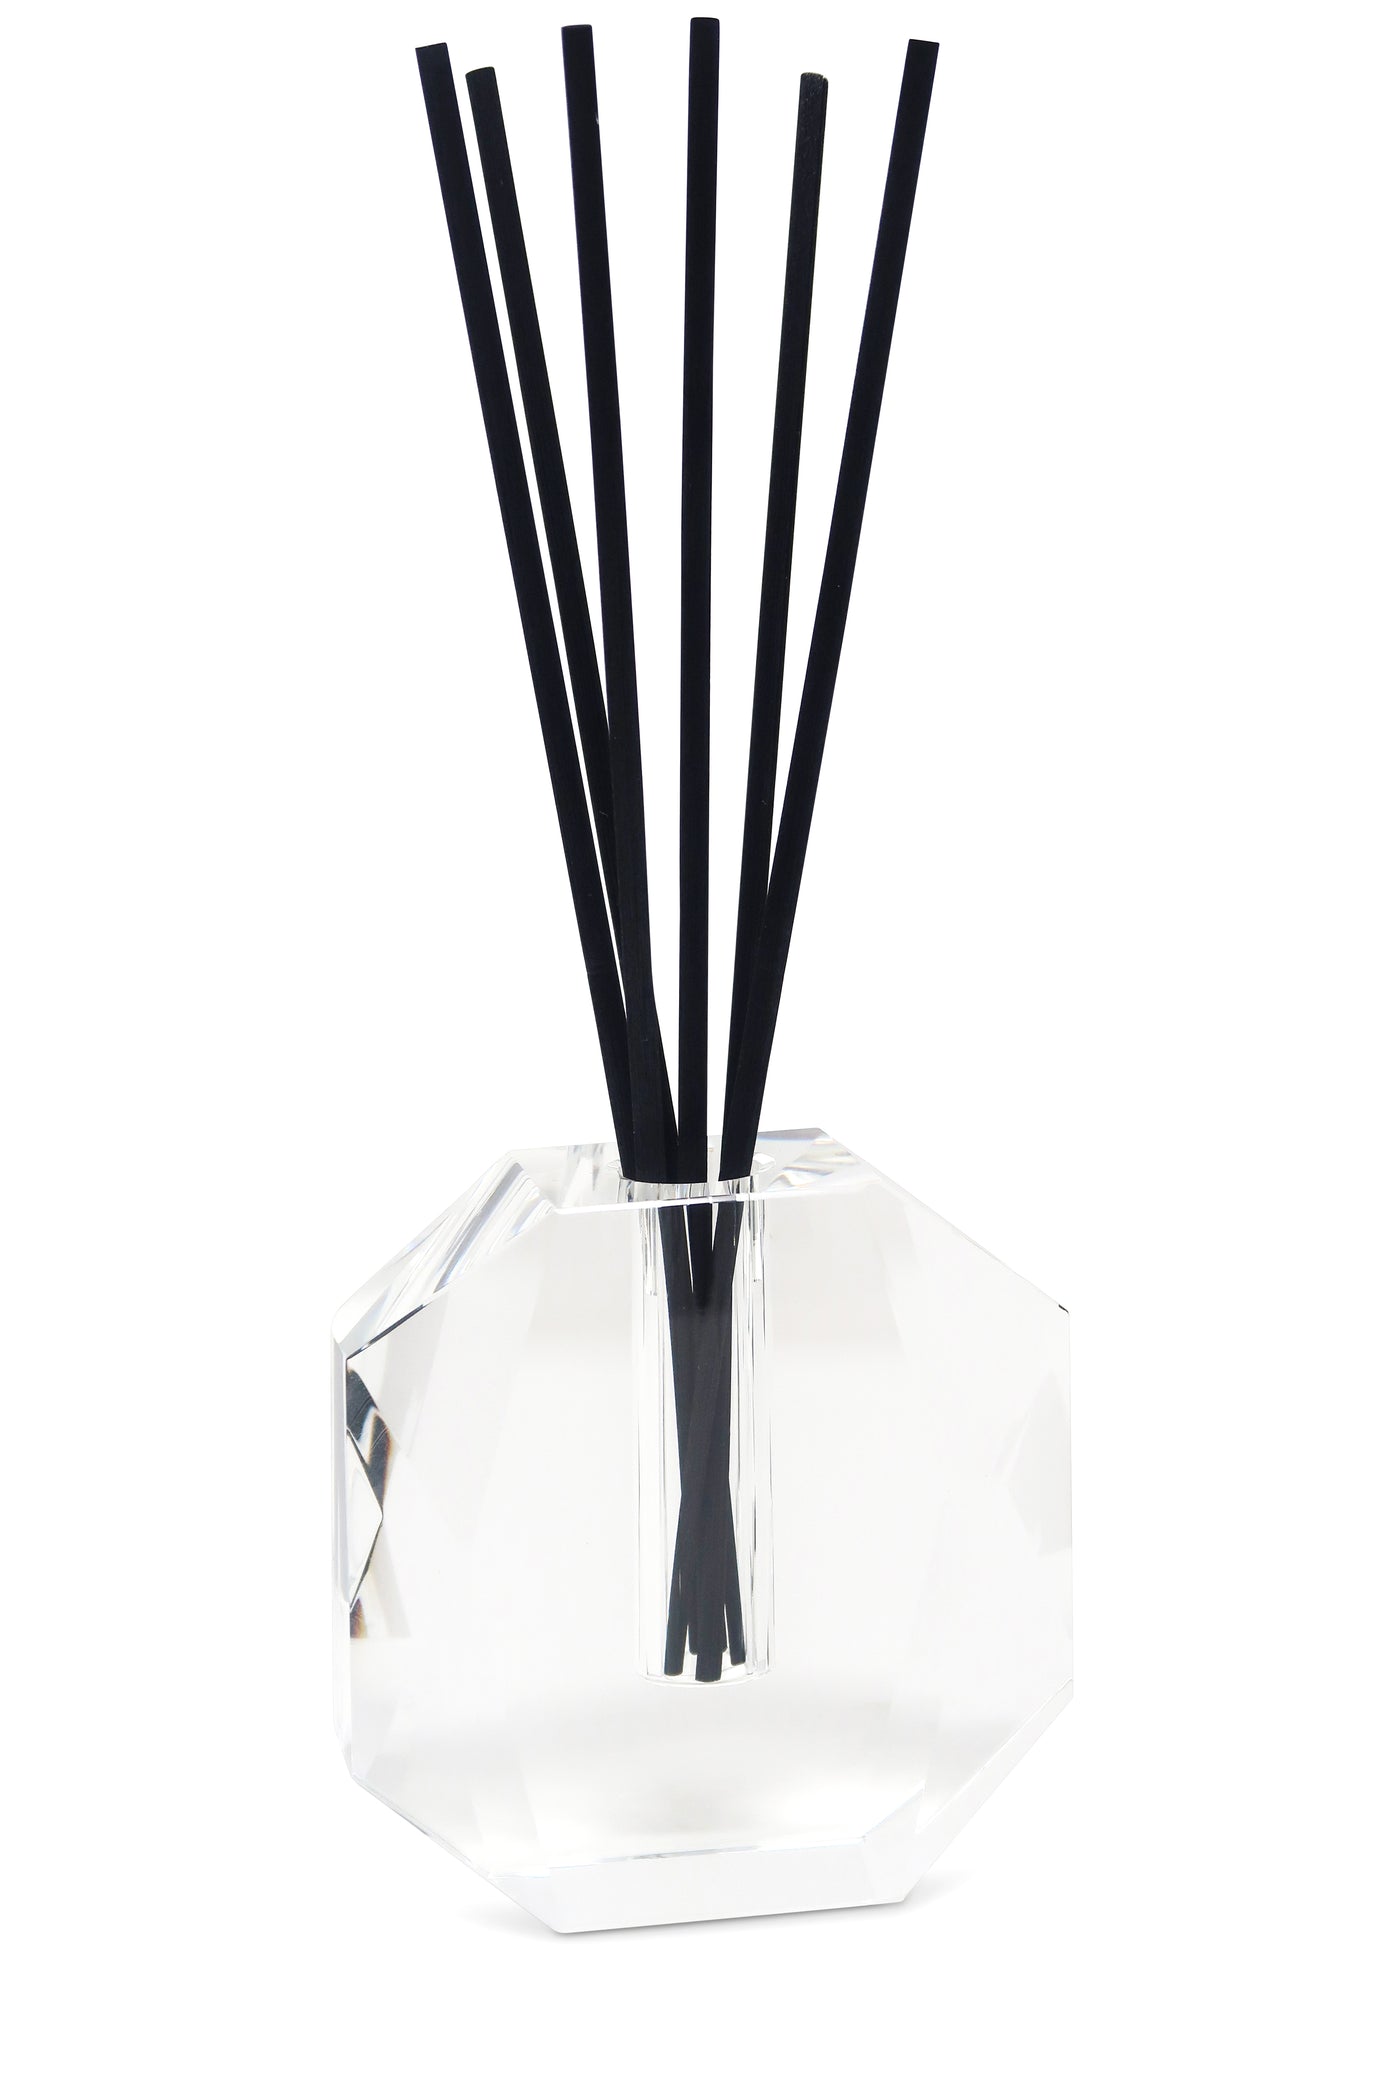 Crystal Diffuser Dimensional Design with Black Reeds